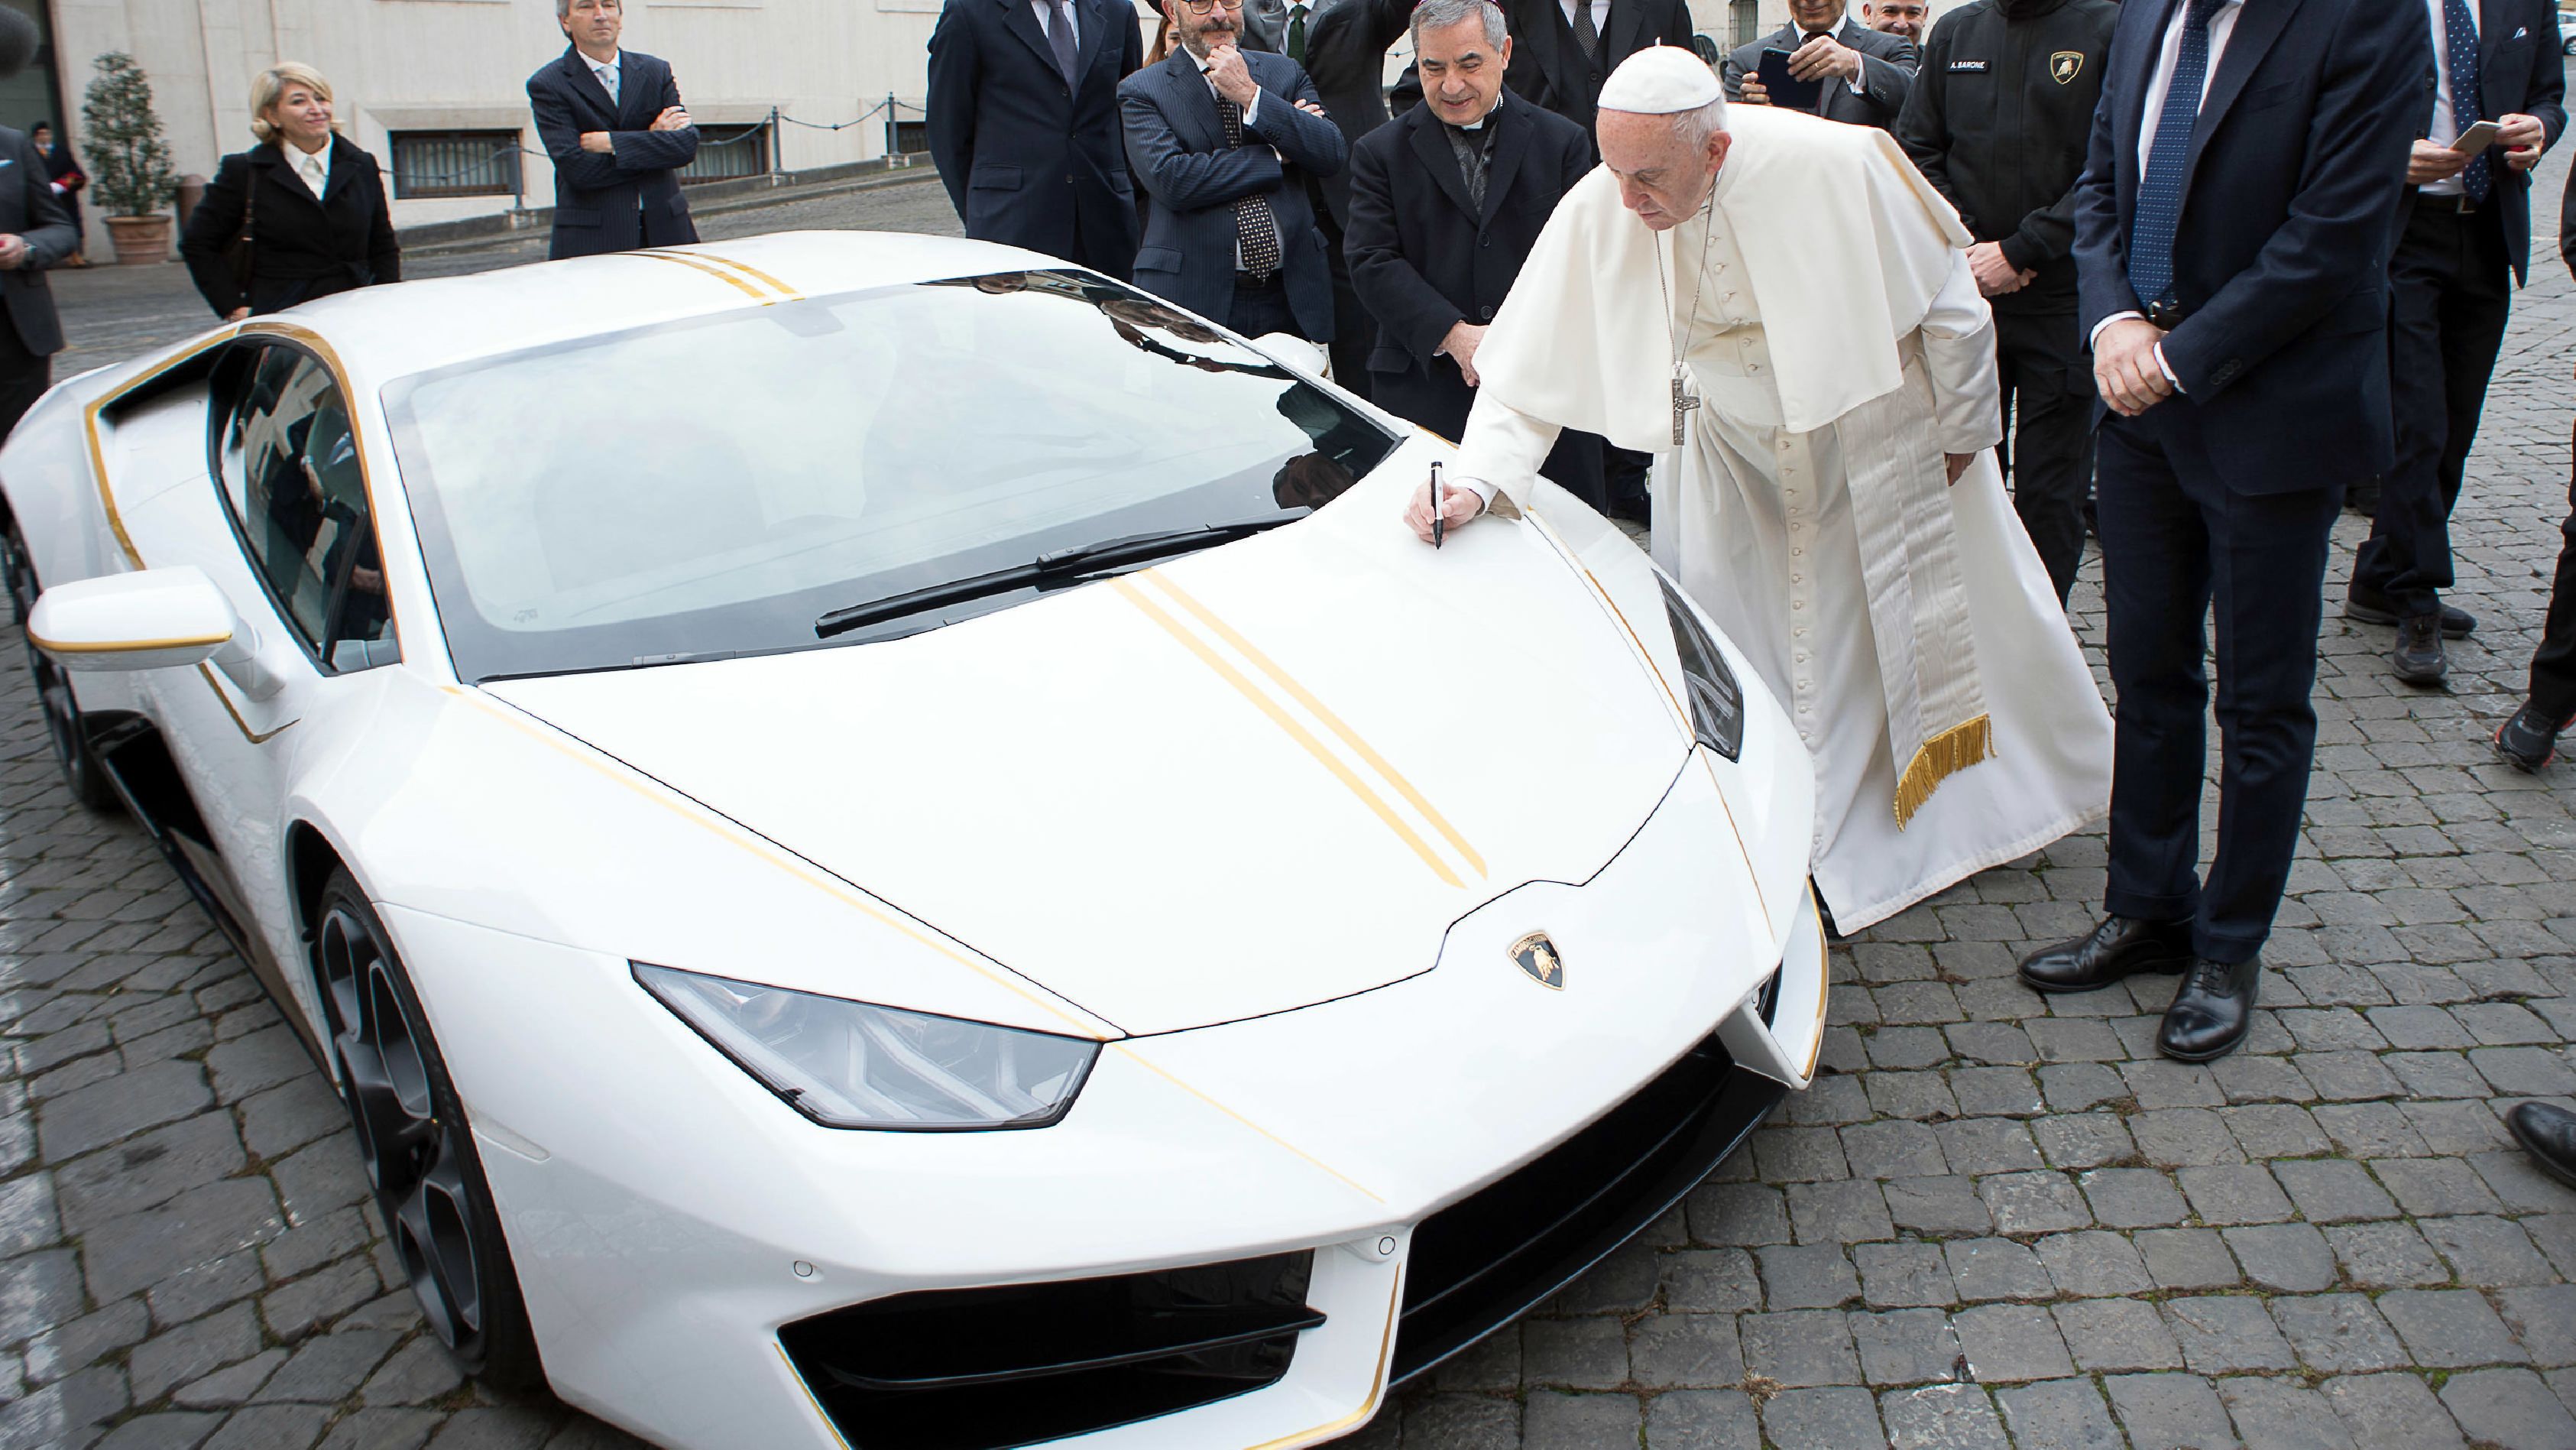 Pope Francis writes on the hood of a Lamborghini donated to him by the luxury sports car maker, at the Vatican.